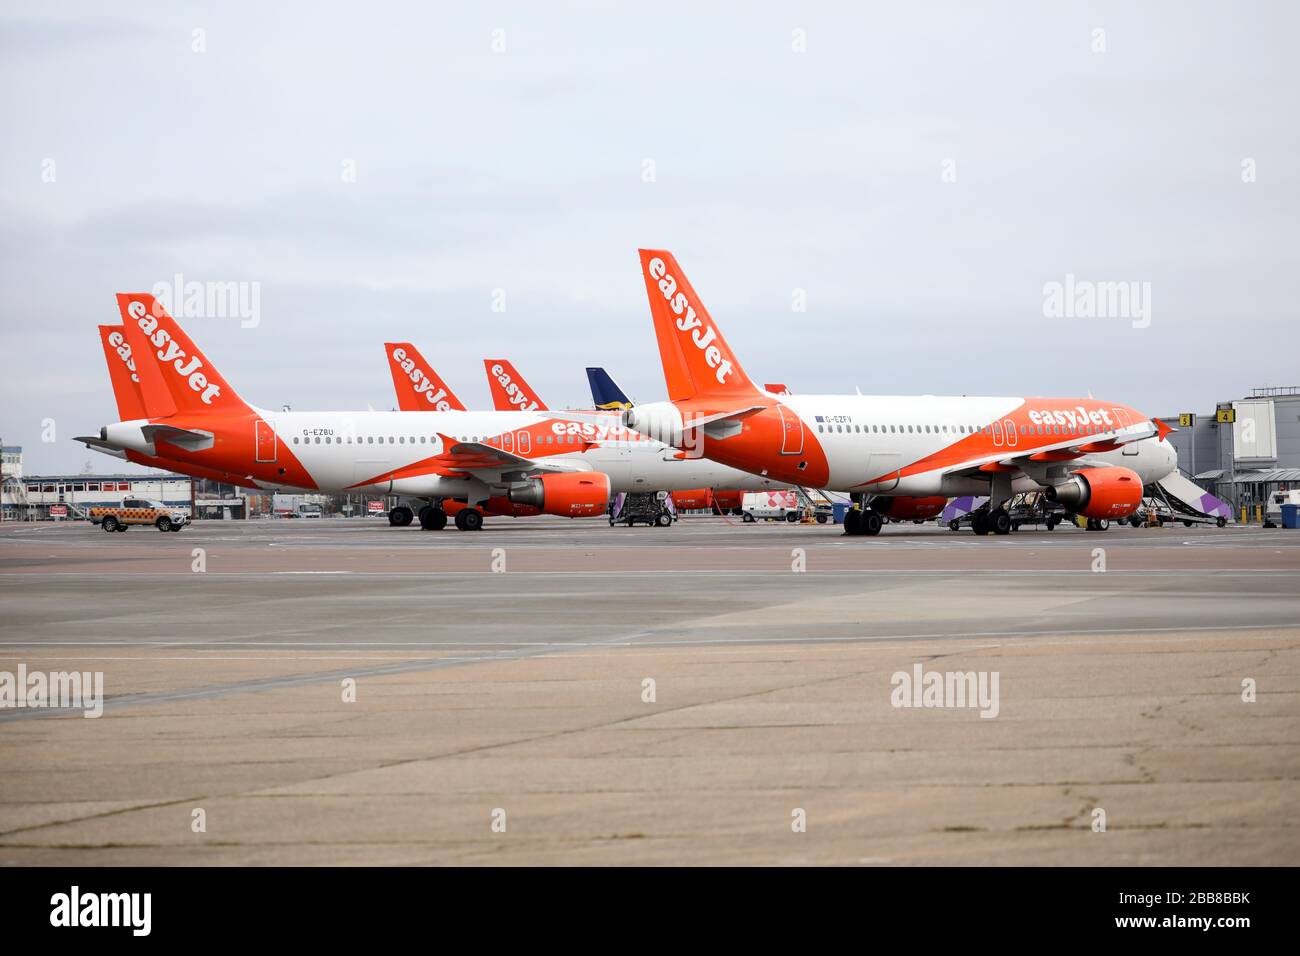 Luton, UK. 30th Mar, 2020. Day Six of Lockdown in the UK. easyJet planes grounded at Luton Airport. The country is on lockdown due to the COVID-19 Coronavirus pandemic. People are not allowed to leave home except for minimal food shopping, medical treatment, exercise - once a day, and essential work. COVID-19 Coronavirus lockdown, Luton, Bedfordshire, UK, on March 30, 2020 Credit: Paul Marriott/Alamy Live News Stock Photo